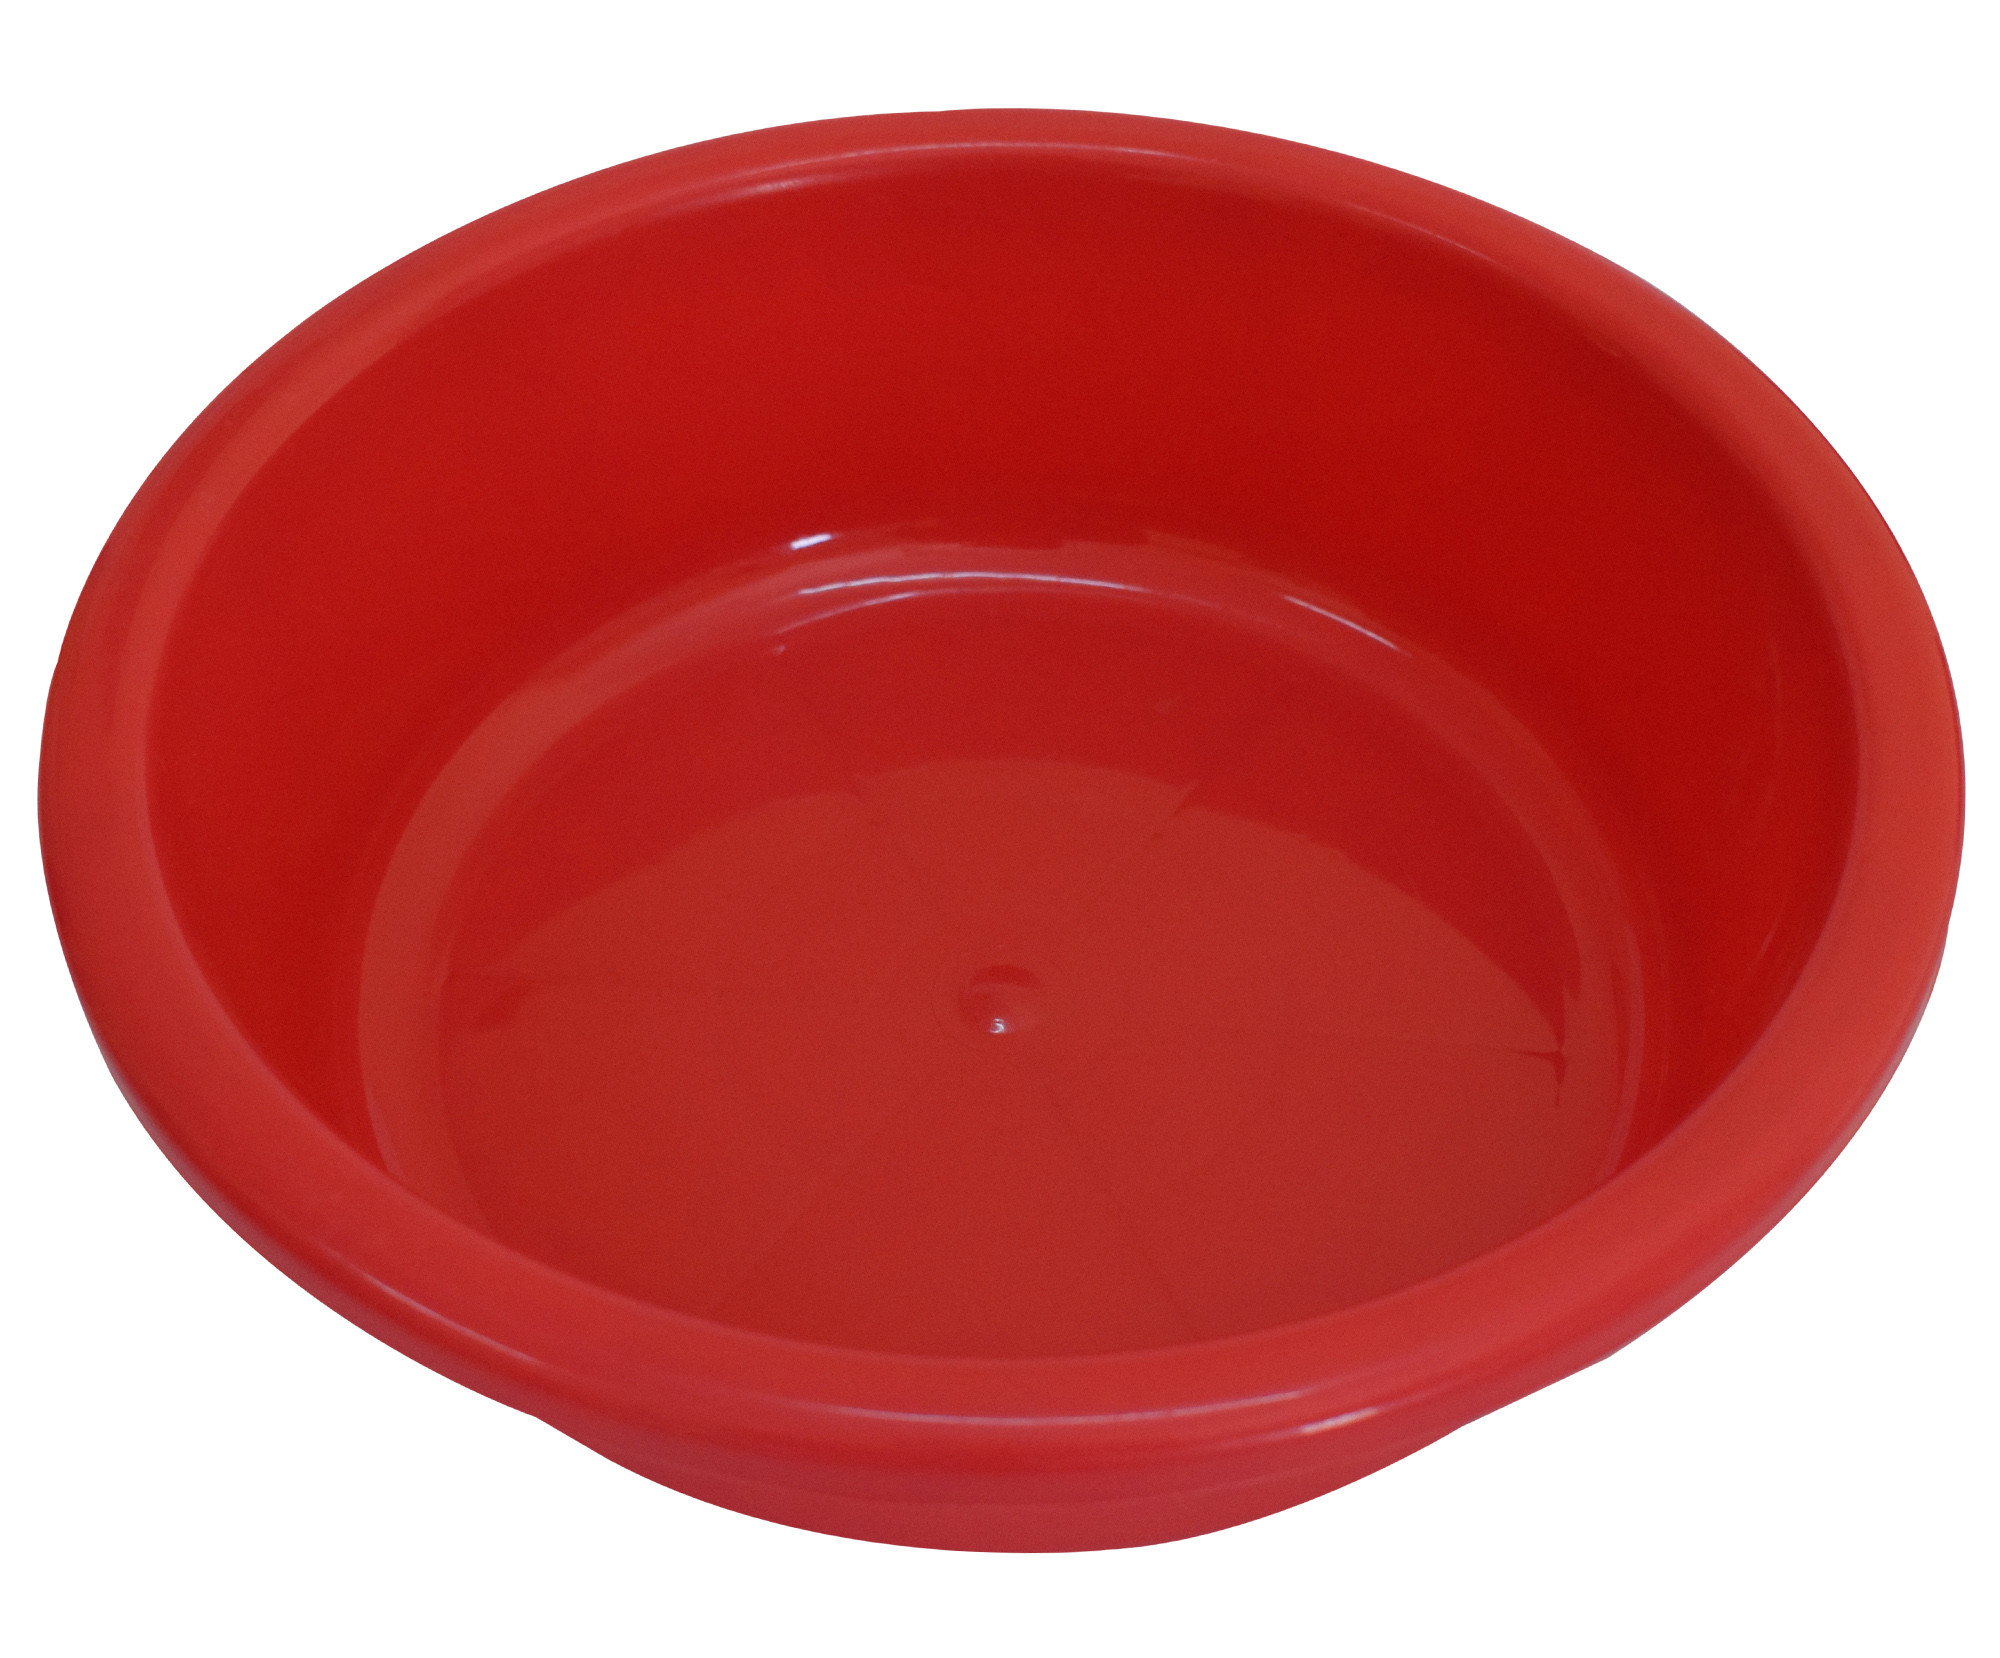 Kuber Industries Multiuses Unbreakable Plastic Knead Dough Basket/Basin Bowl For Home & Kitchen 6 Ltr- Pack of 2 (Yellow & Red)